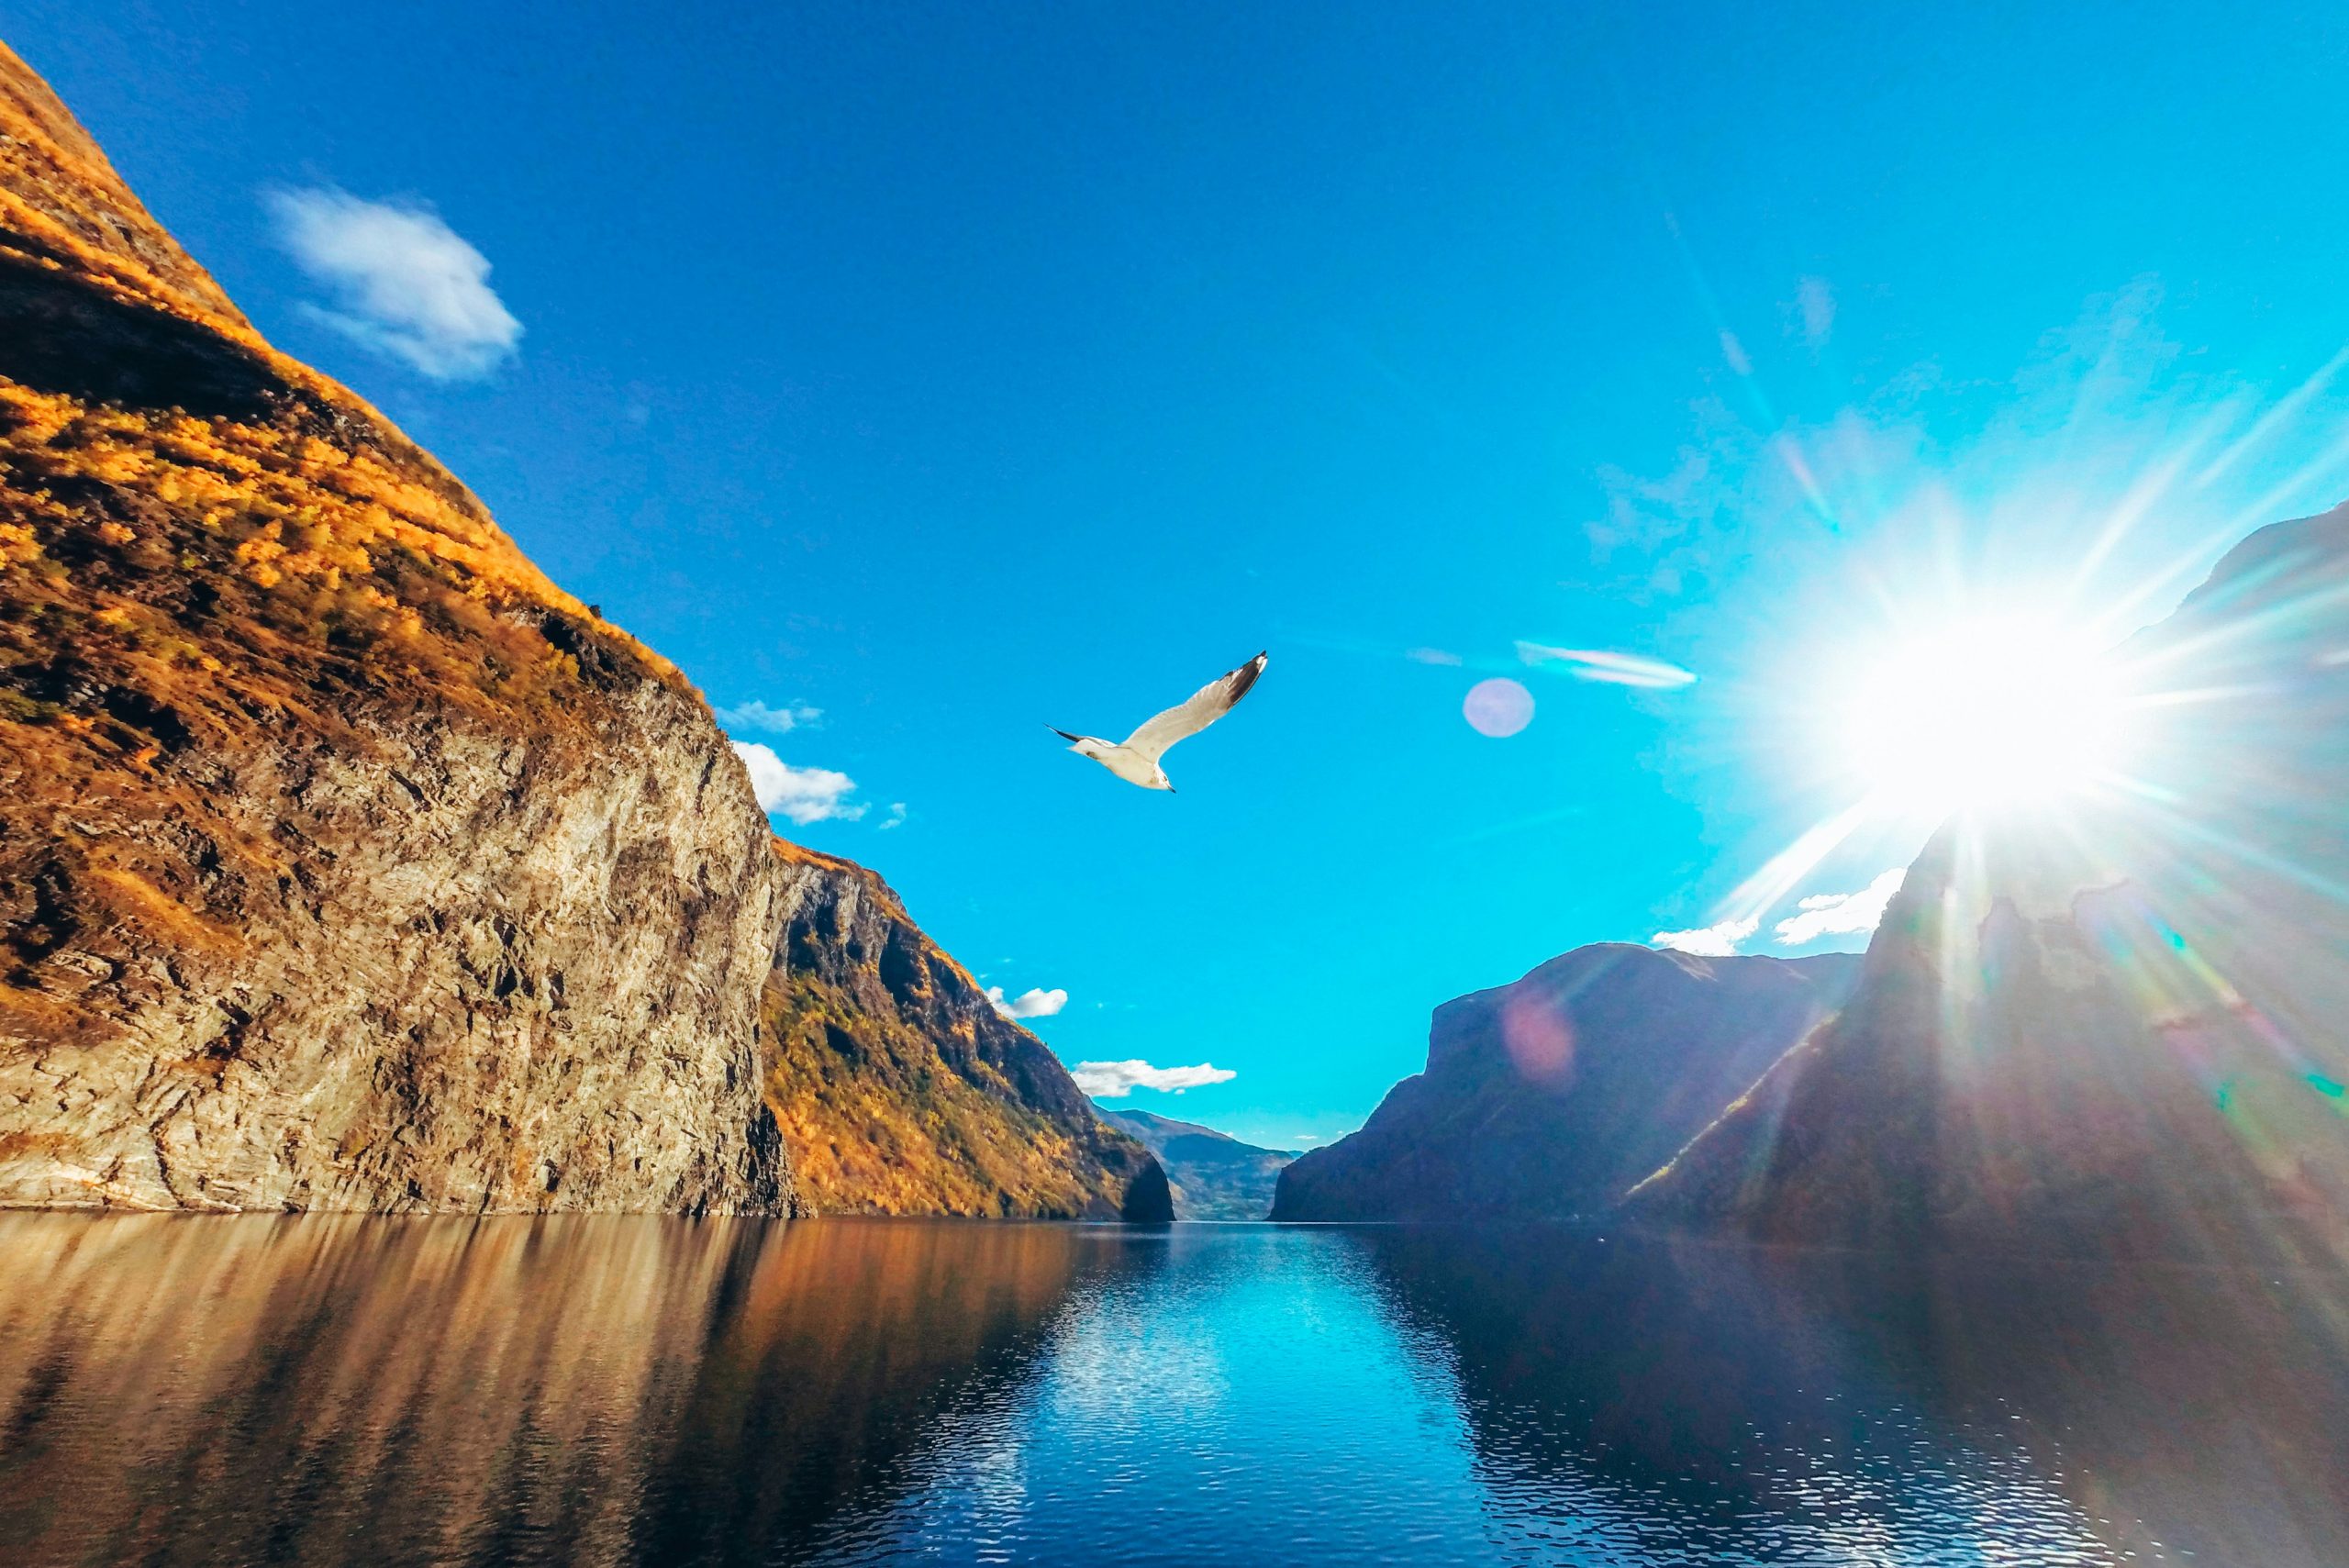 discover the breathtaking beauty of norway's fjord landscape and immerse yourself in nature's wonders.